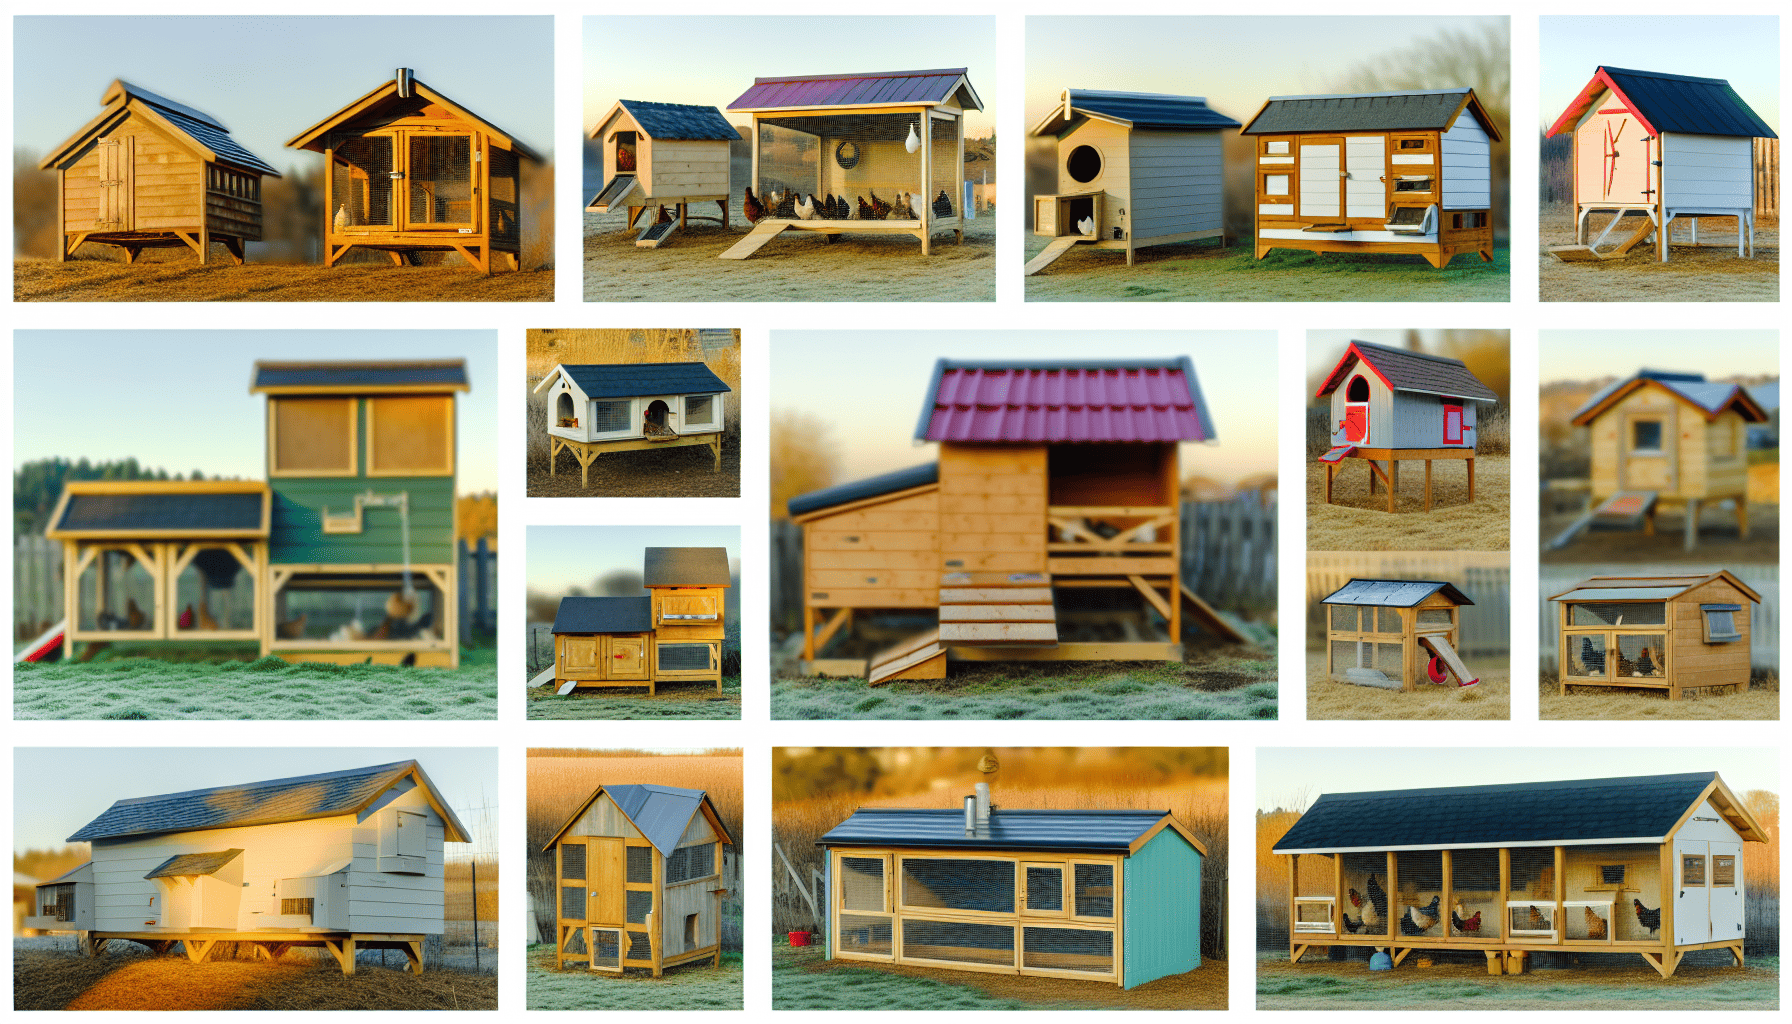 Variety of chicken coops